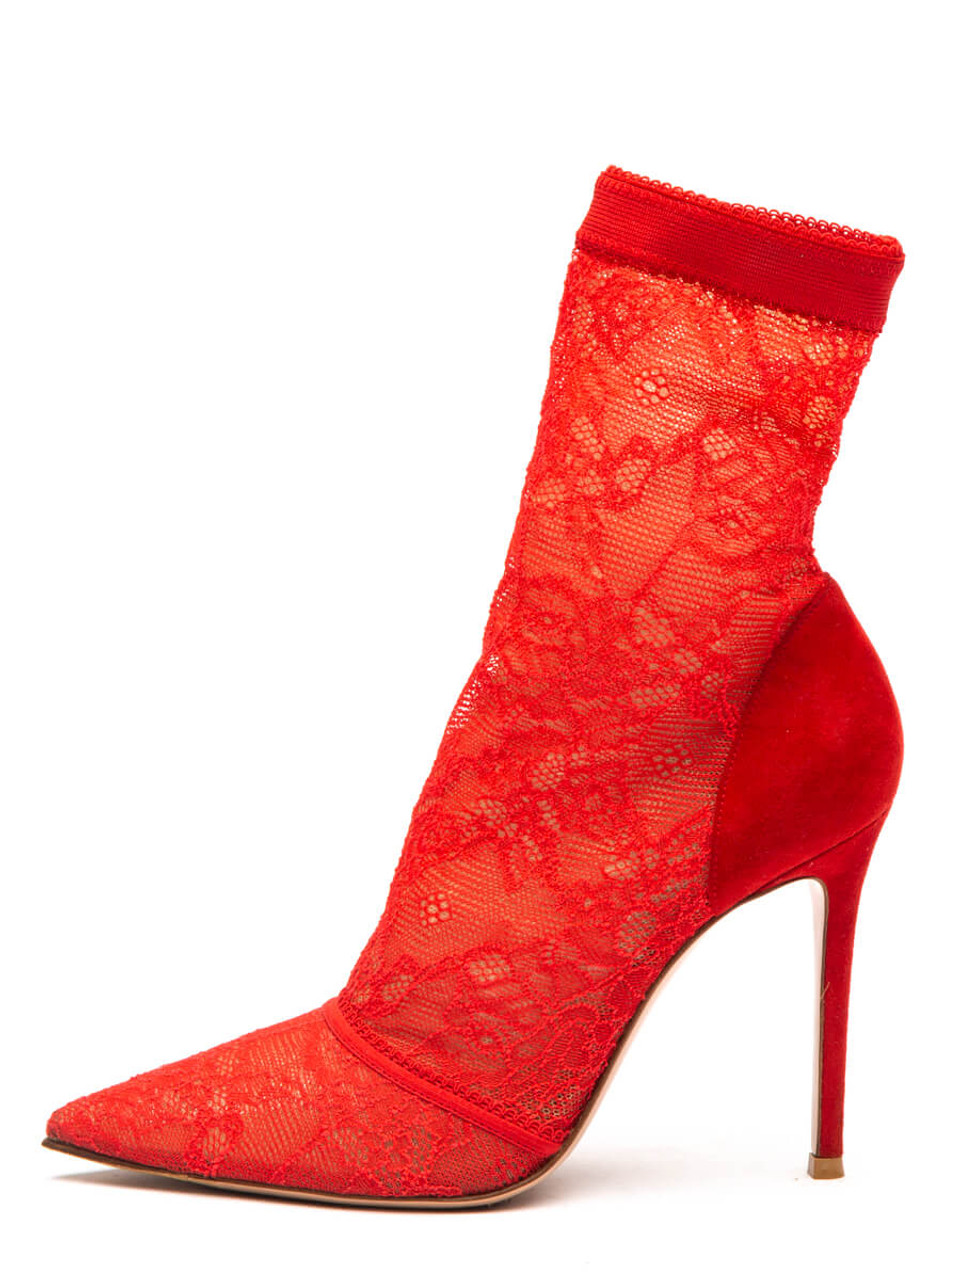 Gianvito Rossi Sock Ankle Boots Red Lace And Suede